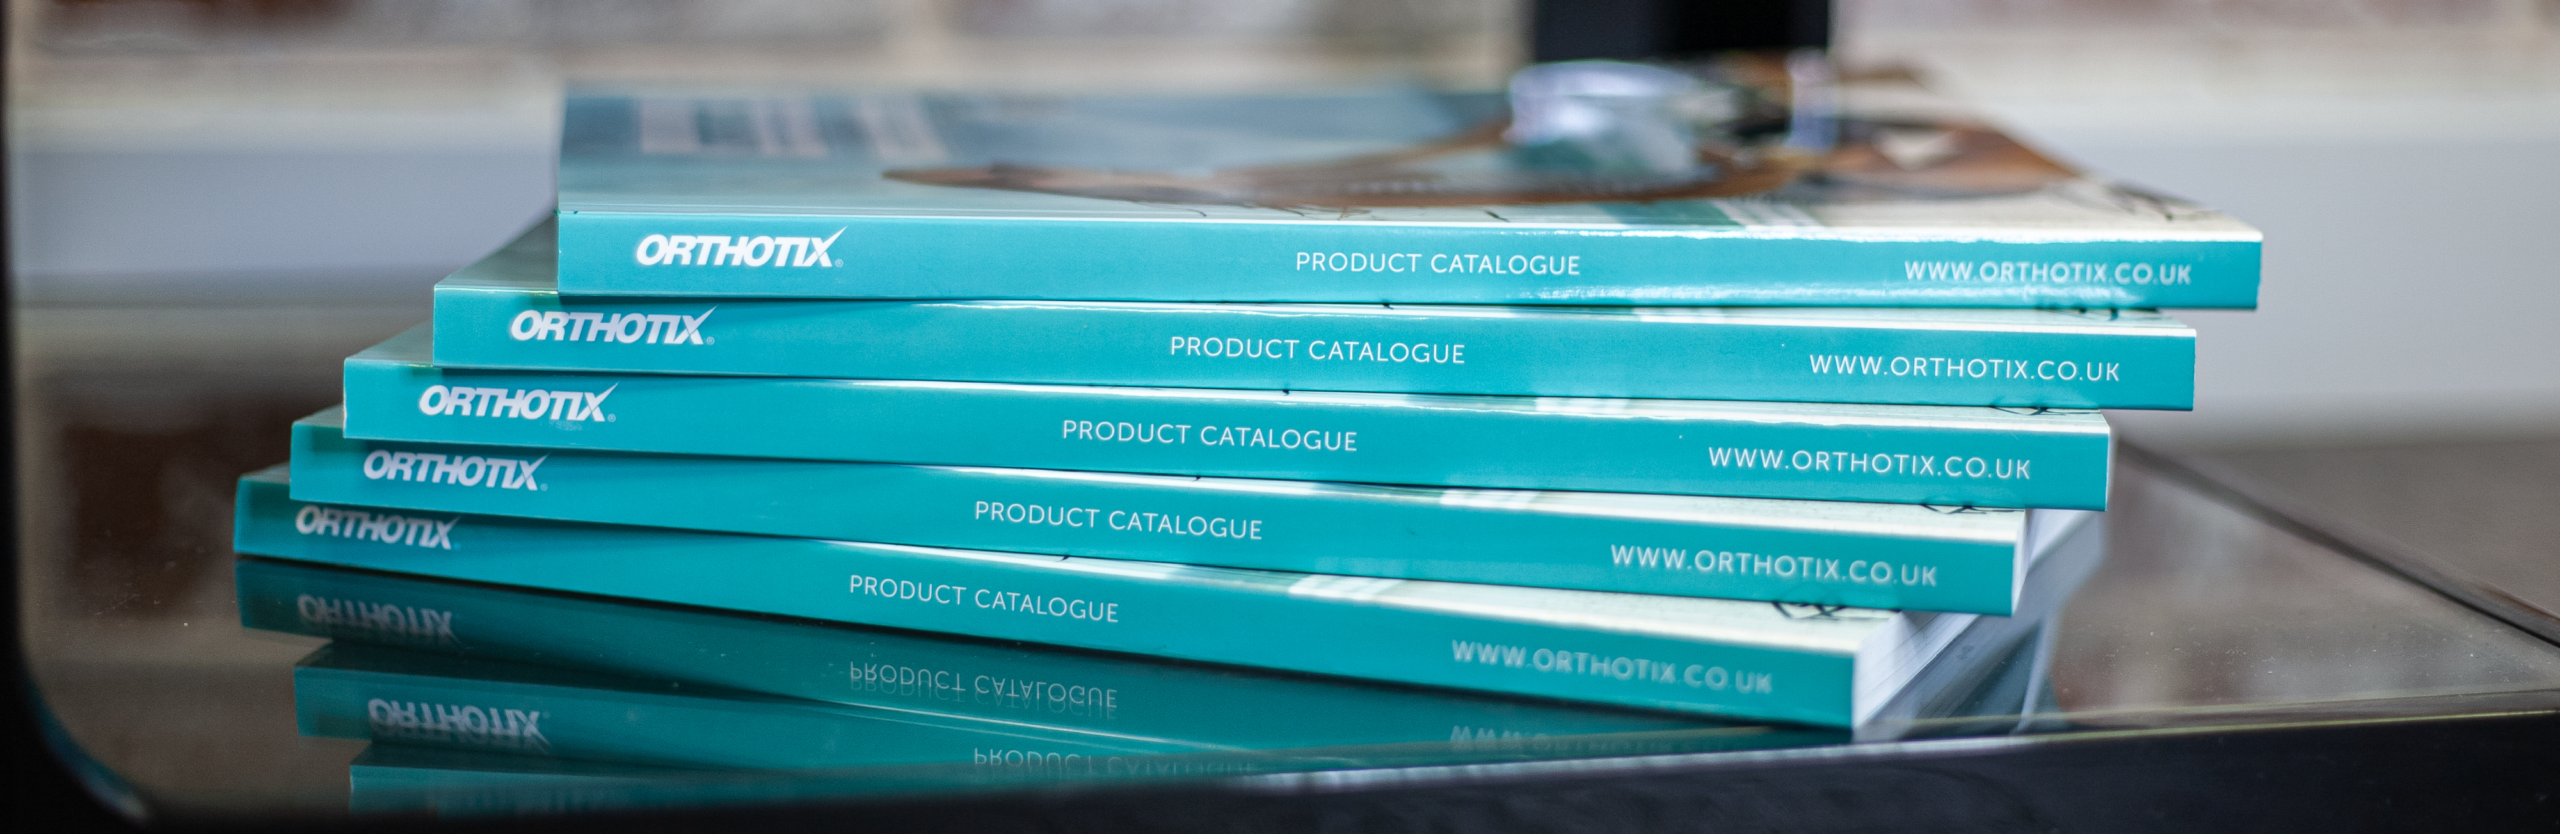 Orthotix 6th Edition Catalogues